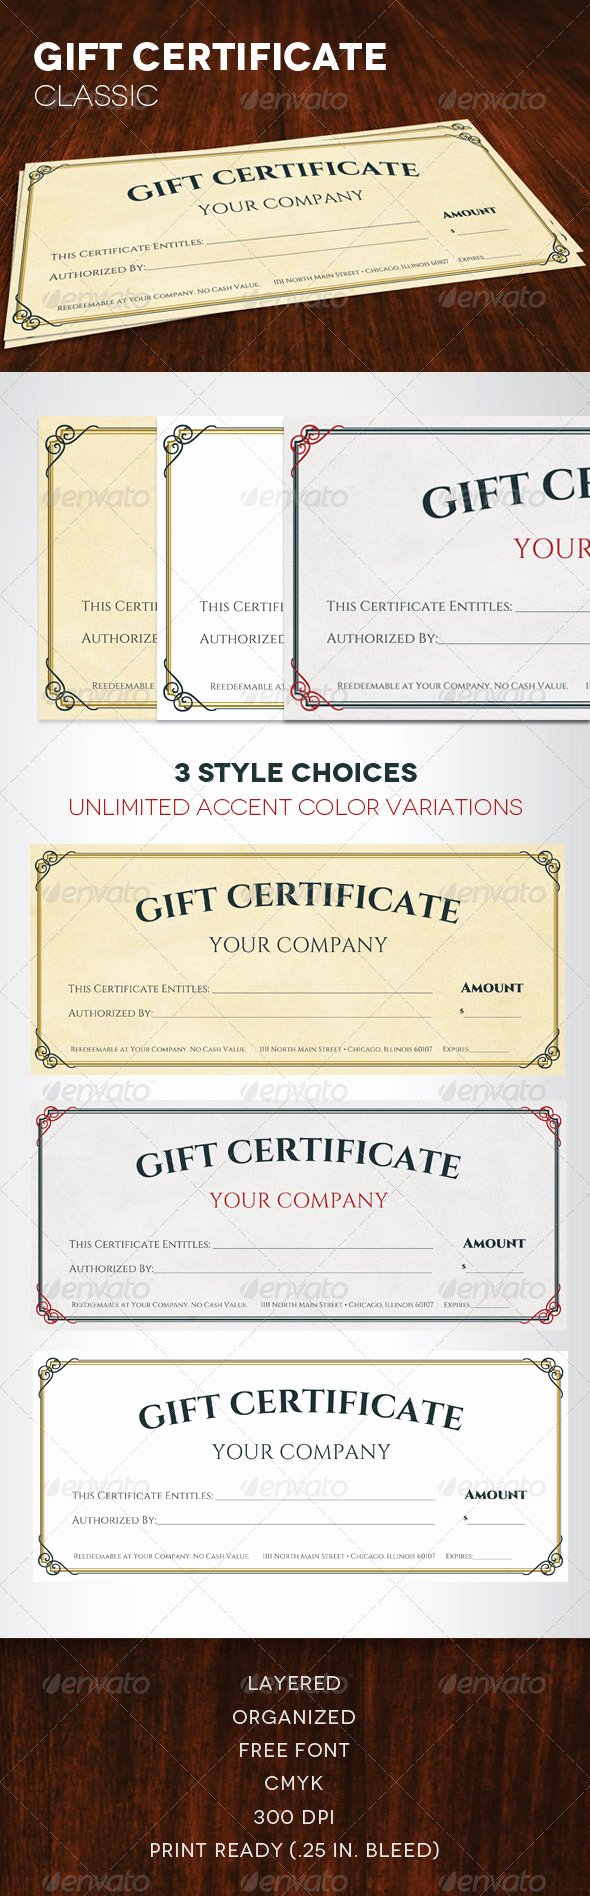 529 Gift Certificate Template Inspirational Gift Certificate Free Mock Up Tinkytyler Stock